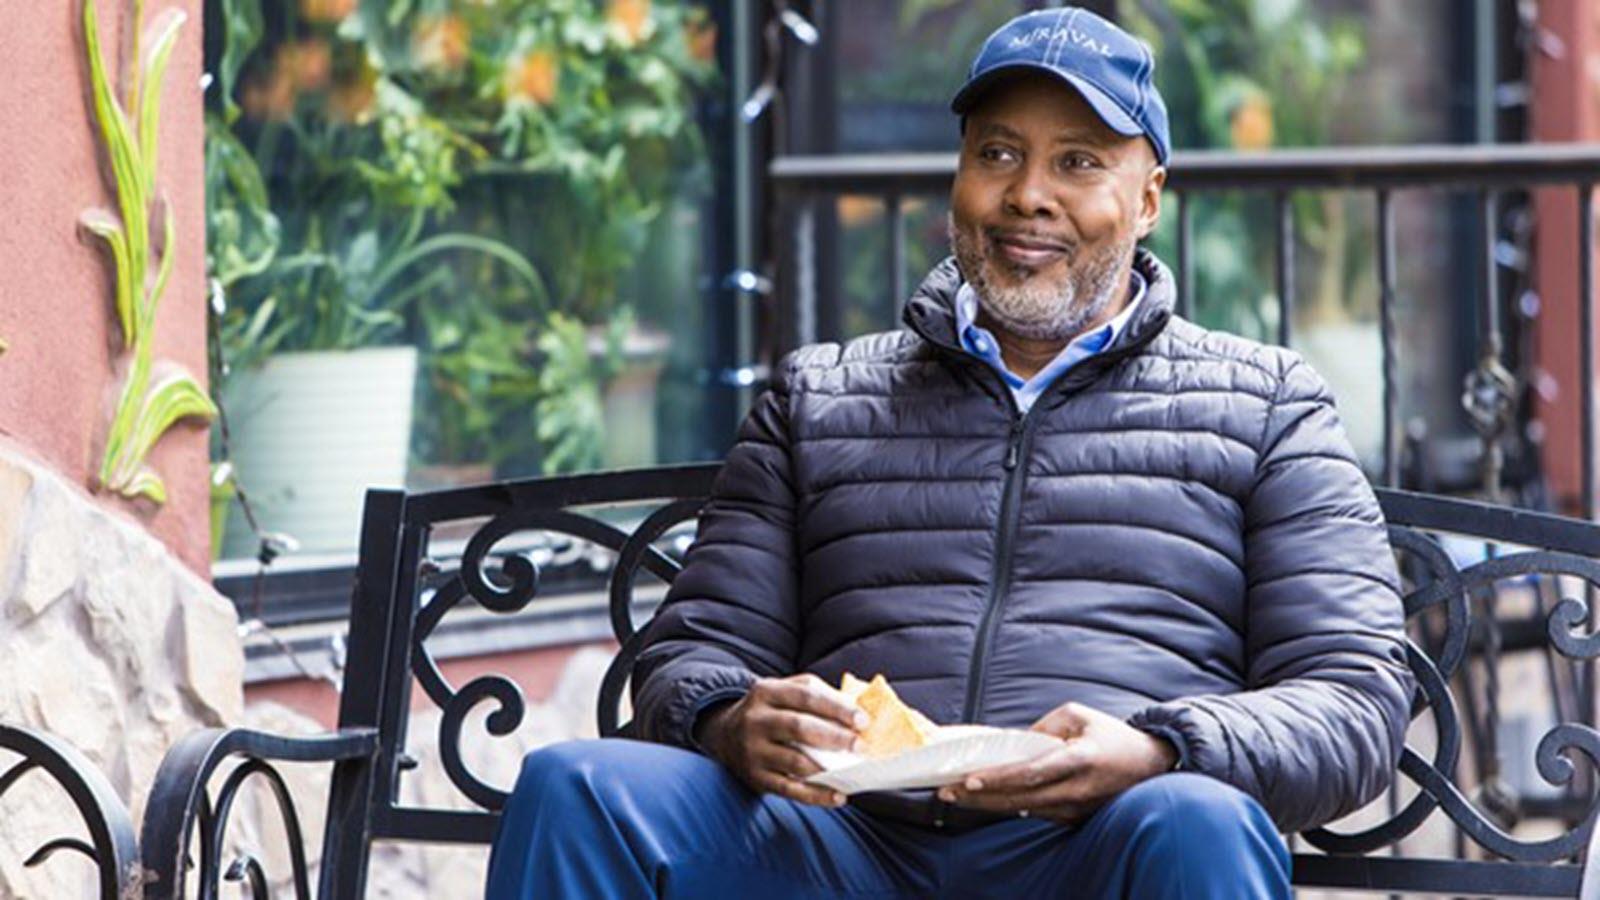 Photo of Arthur, a CIDP patient, sitting outside in a ball cap holding a slice of pizza.